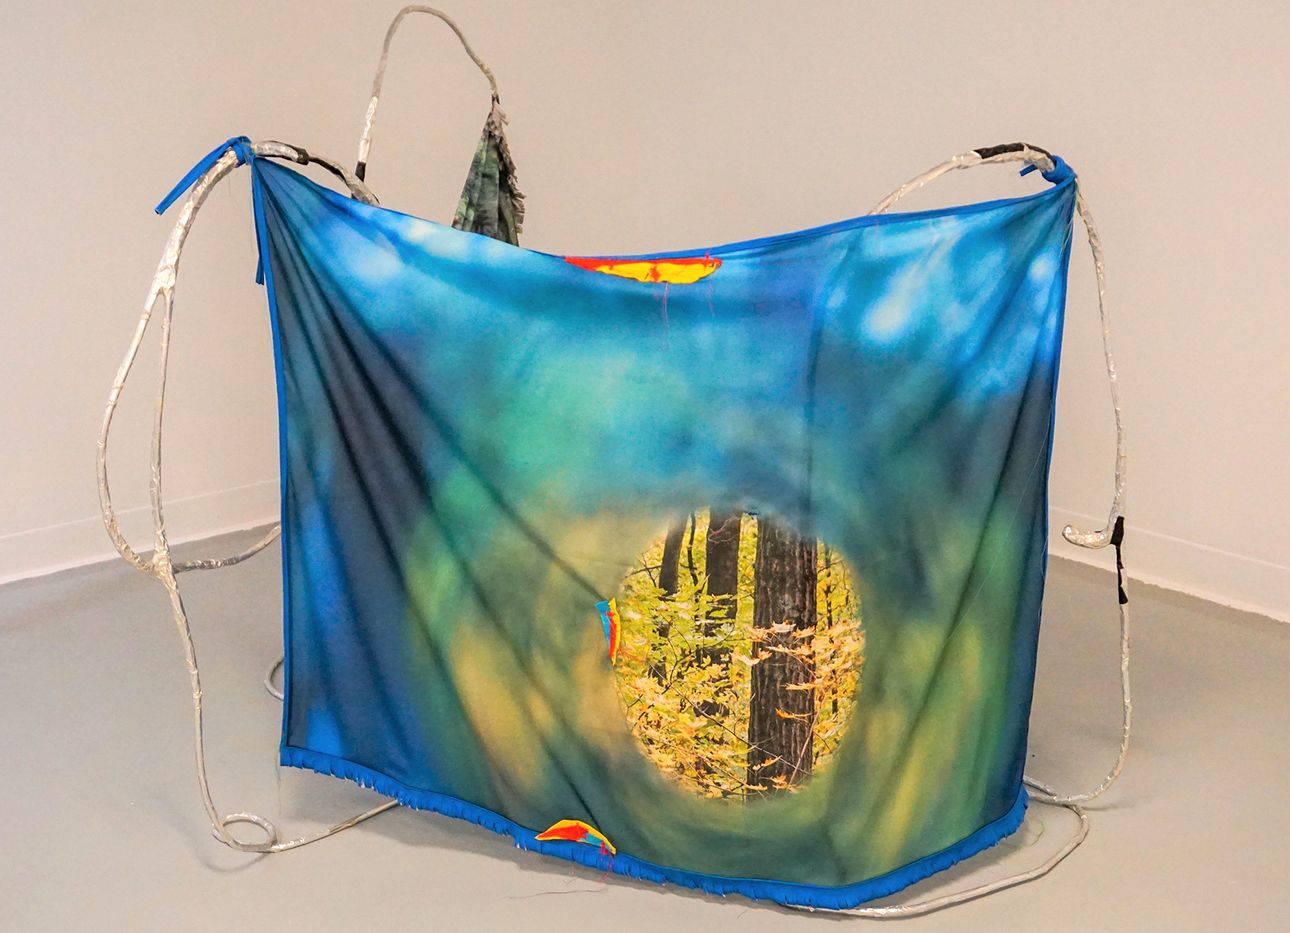 A blue printed textile hung with aluminum wire in an art gallery.